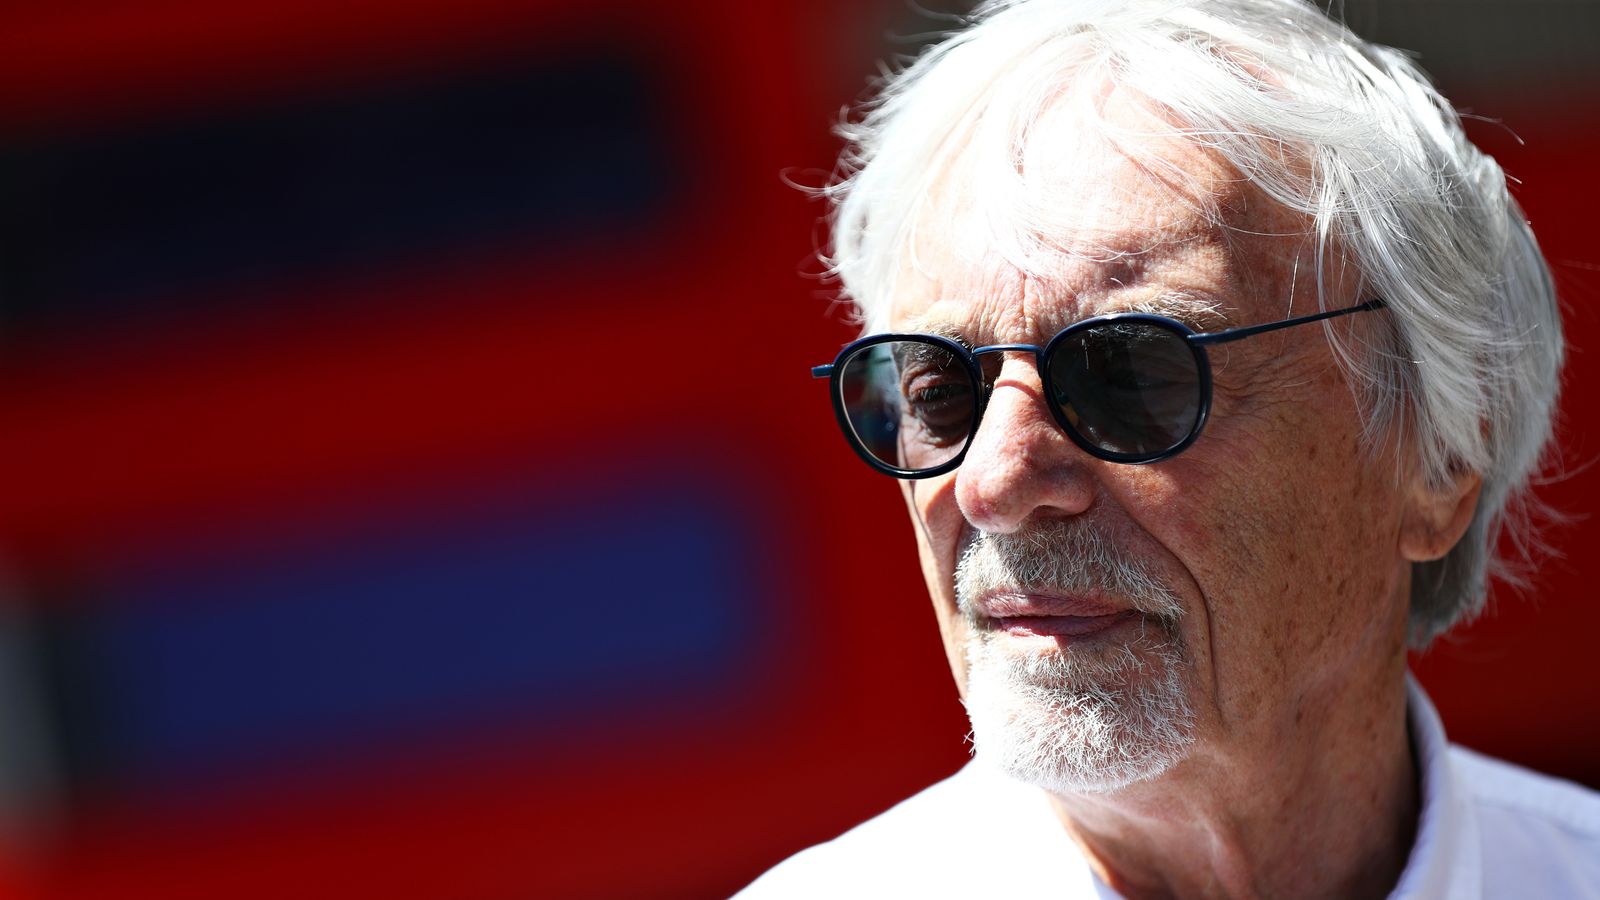 Bernie Ecclestone defends Vladimir Putin and says Lewis Hamilton should 'brush aside' racist slur as F1 condemns comments from former boss